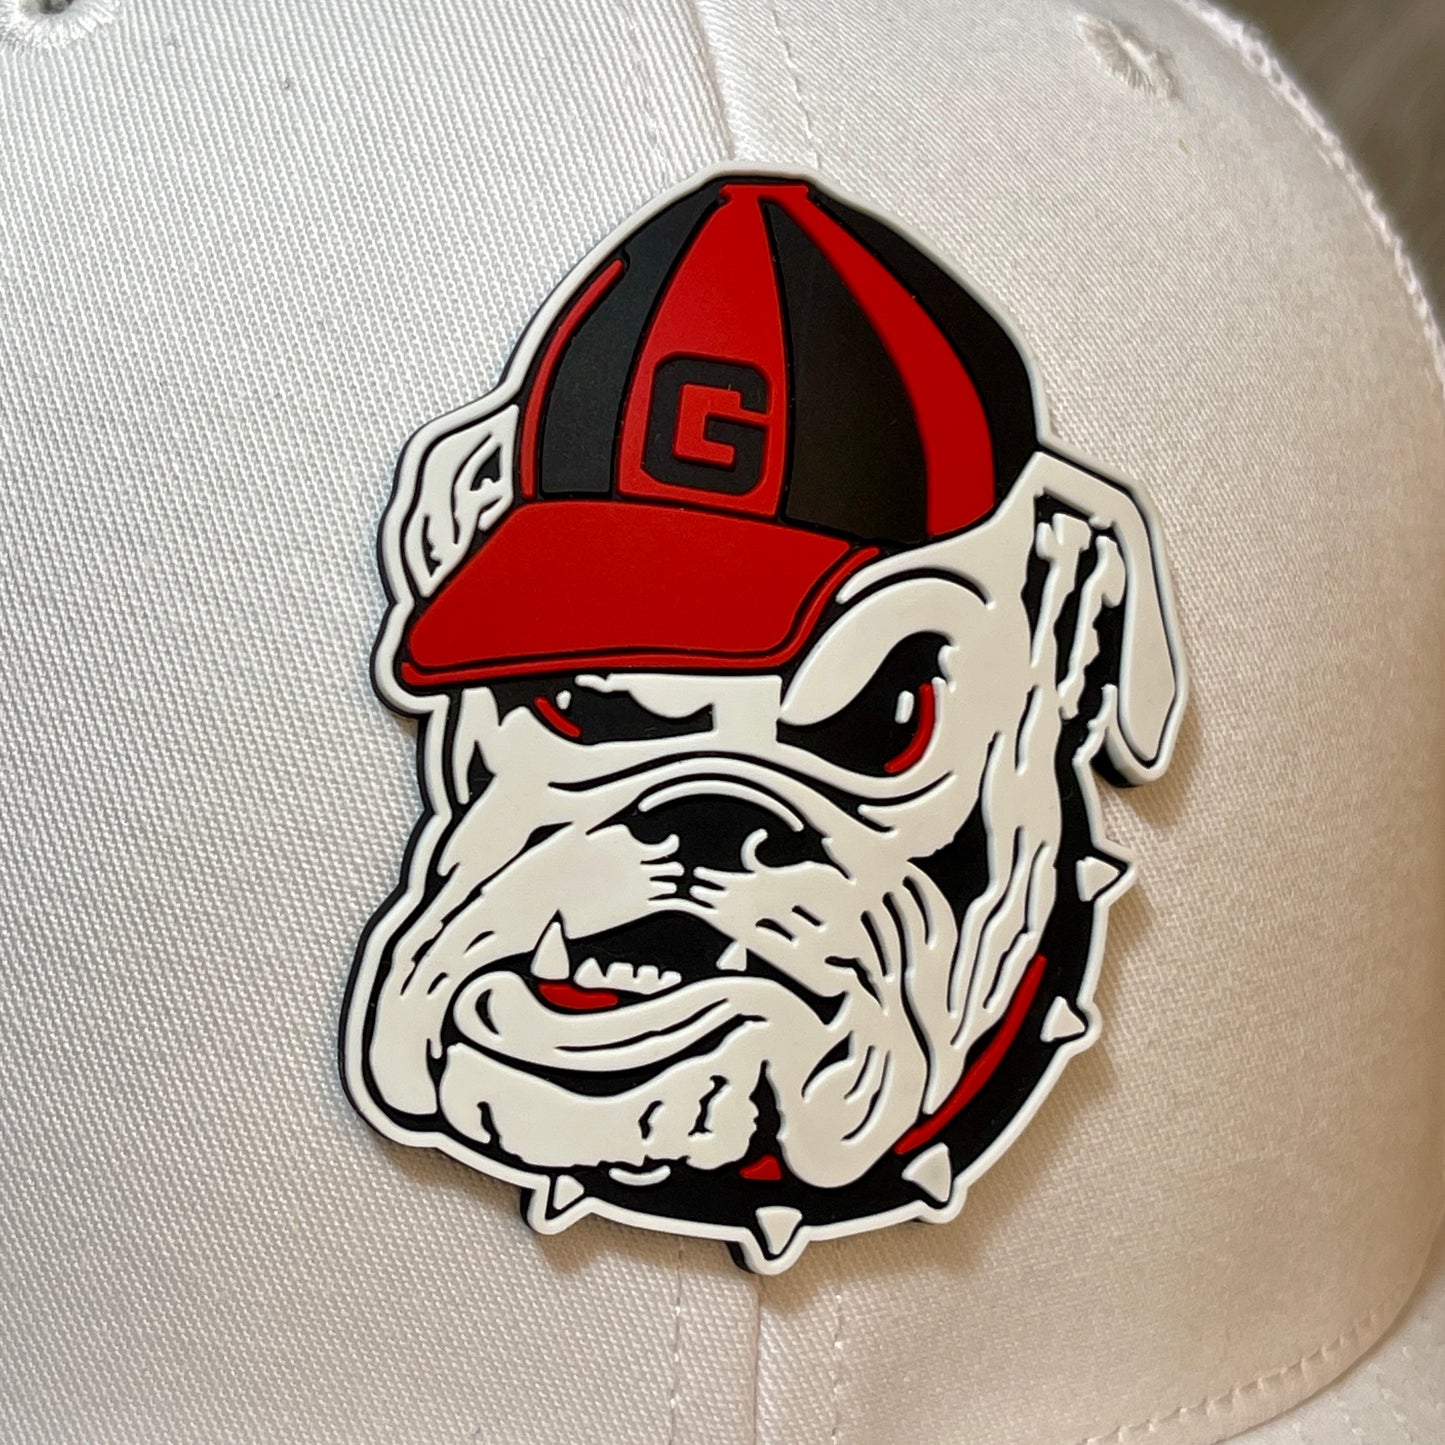 Georgia Bulldogs Vintage 3D Logo Patterned Mesh Snapback Trucker Hat- Red/ Red to White Fade - Ten Gallon Hat Co.